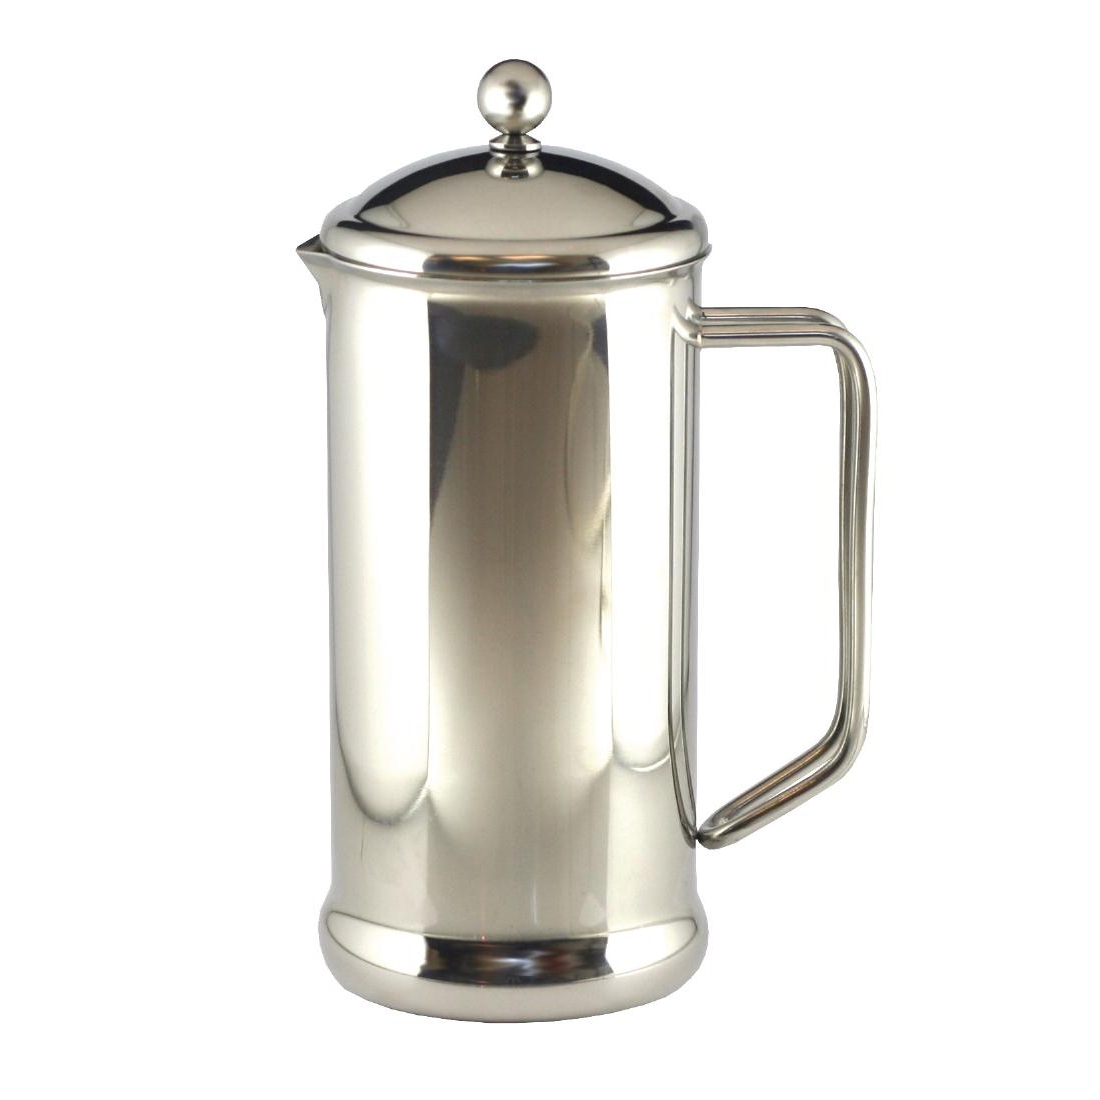 Cafetiere Stainless Steel Polished Finish 8 Cup